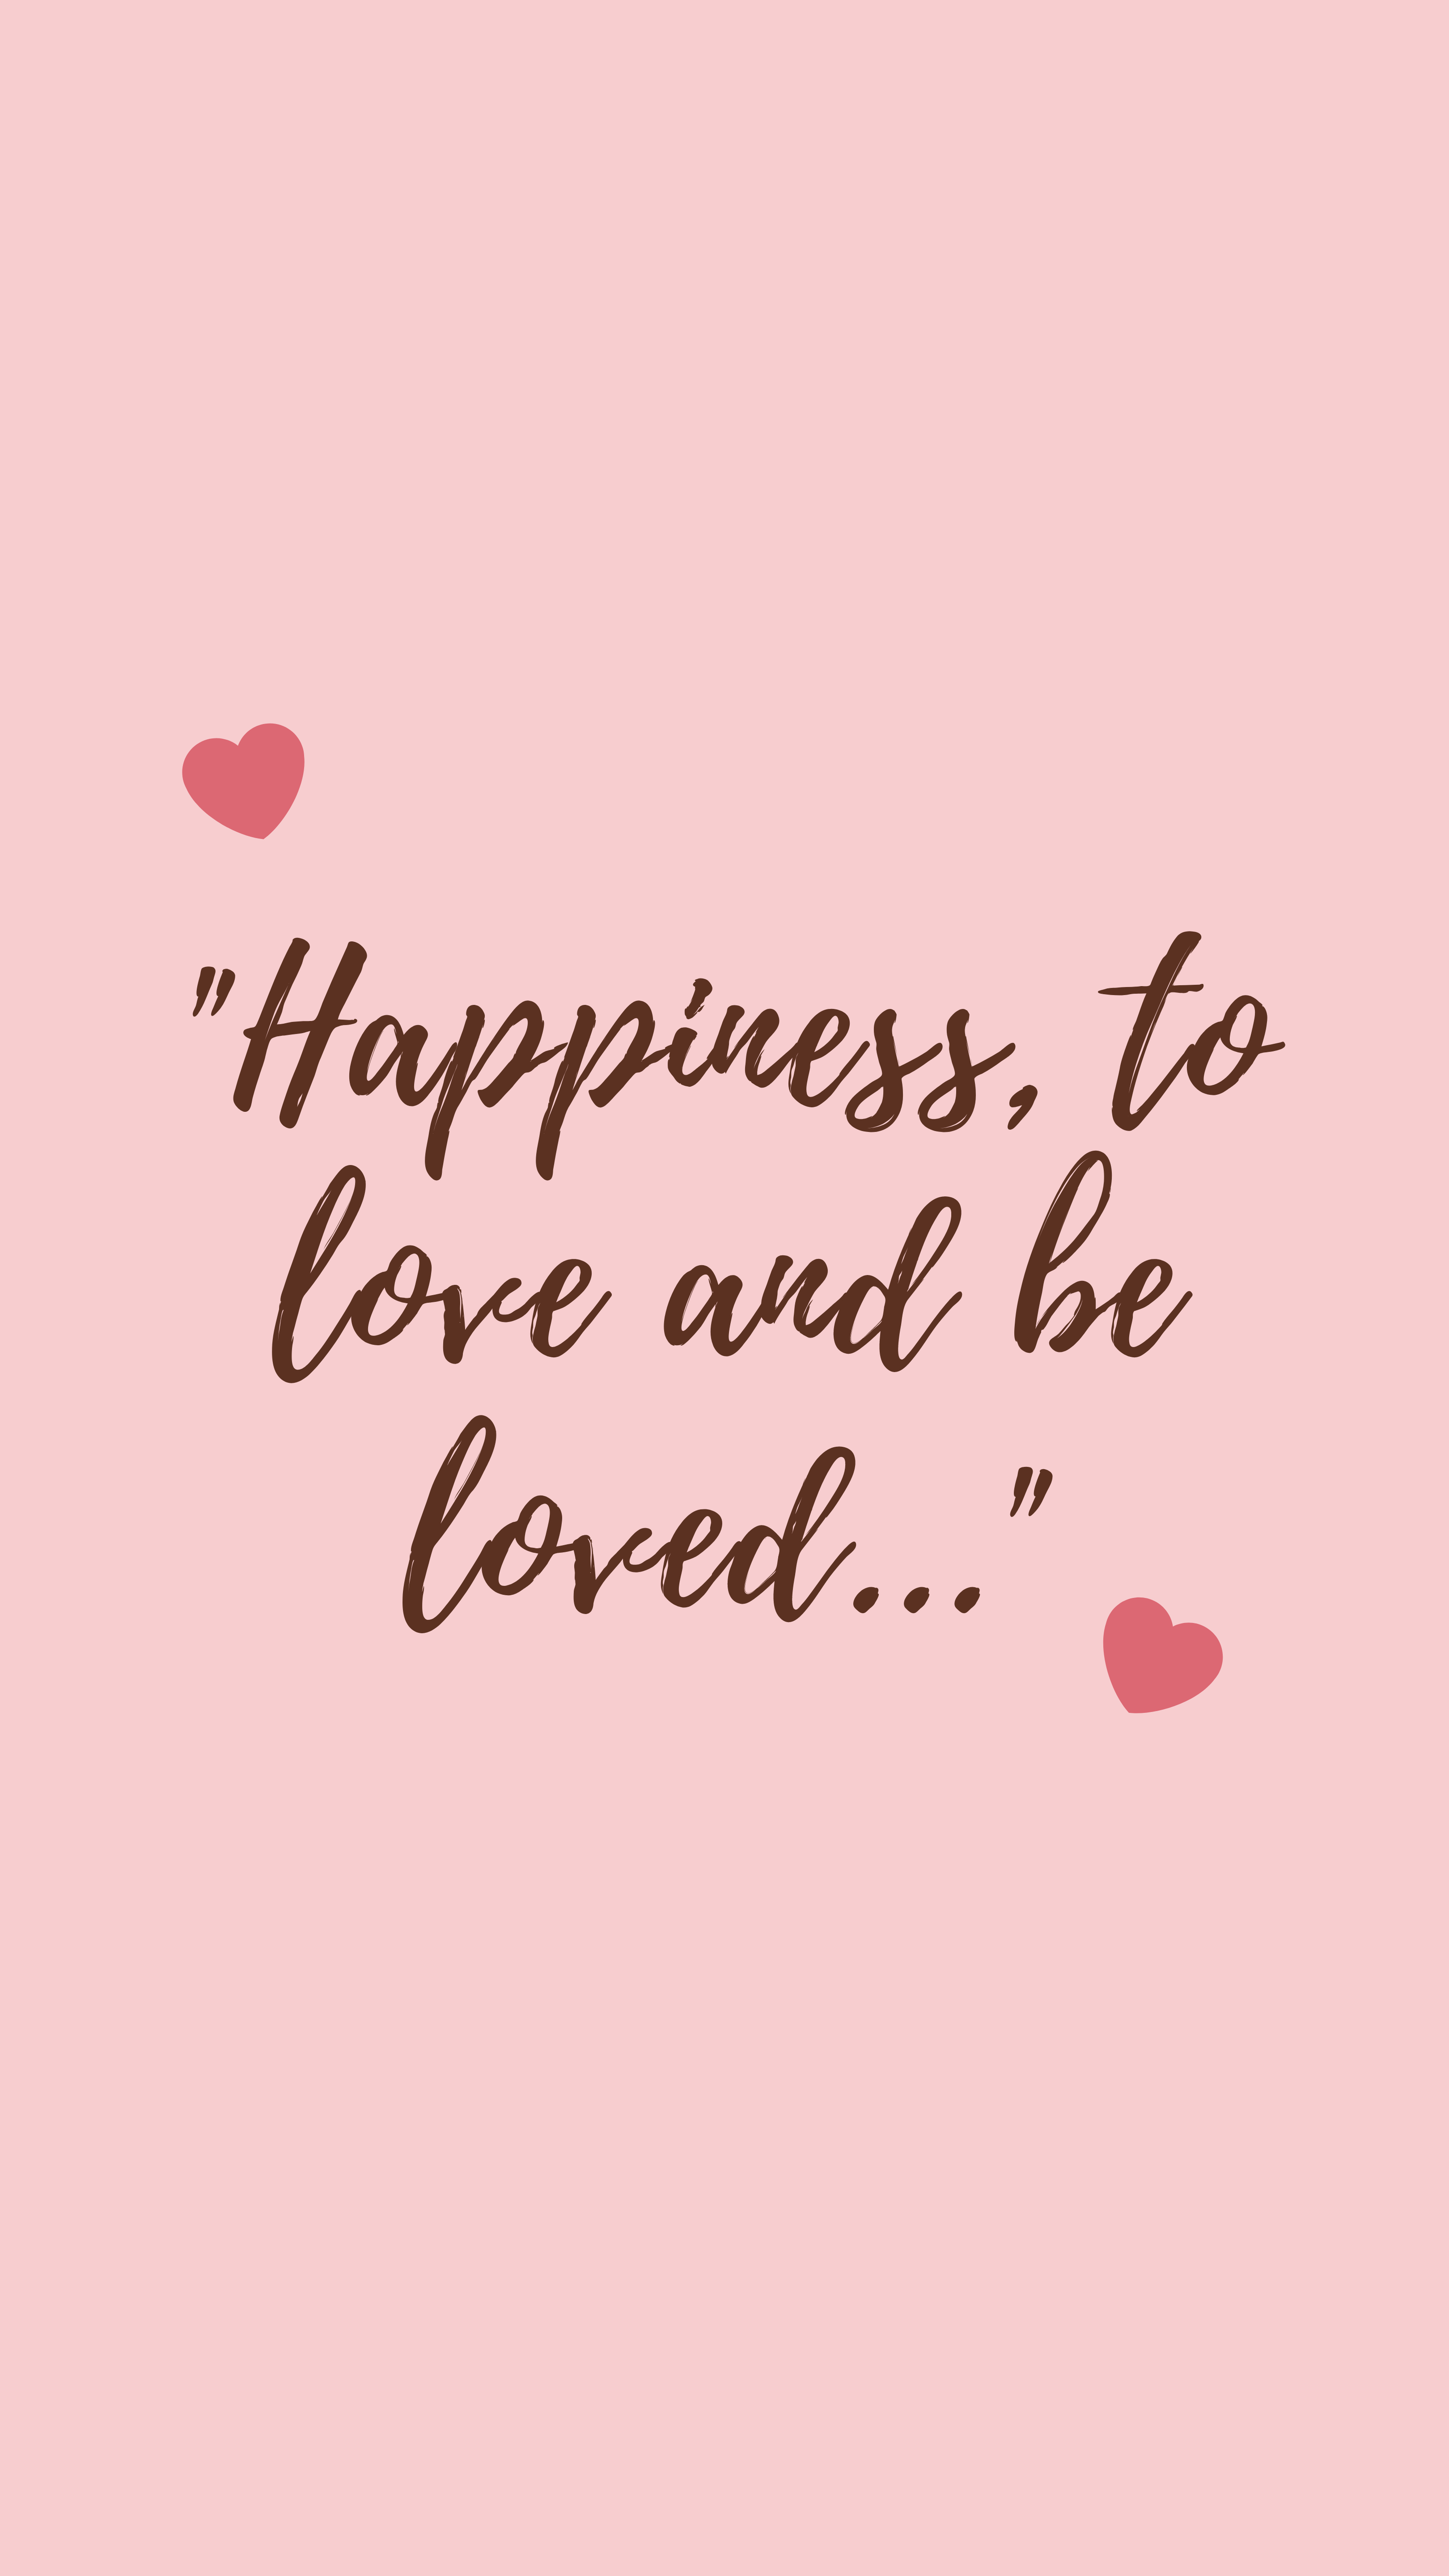 happiness, quote, quotation, love, words, phrase, feelings Full HD